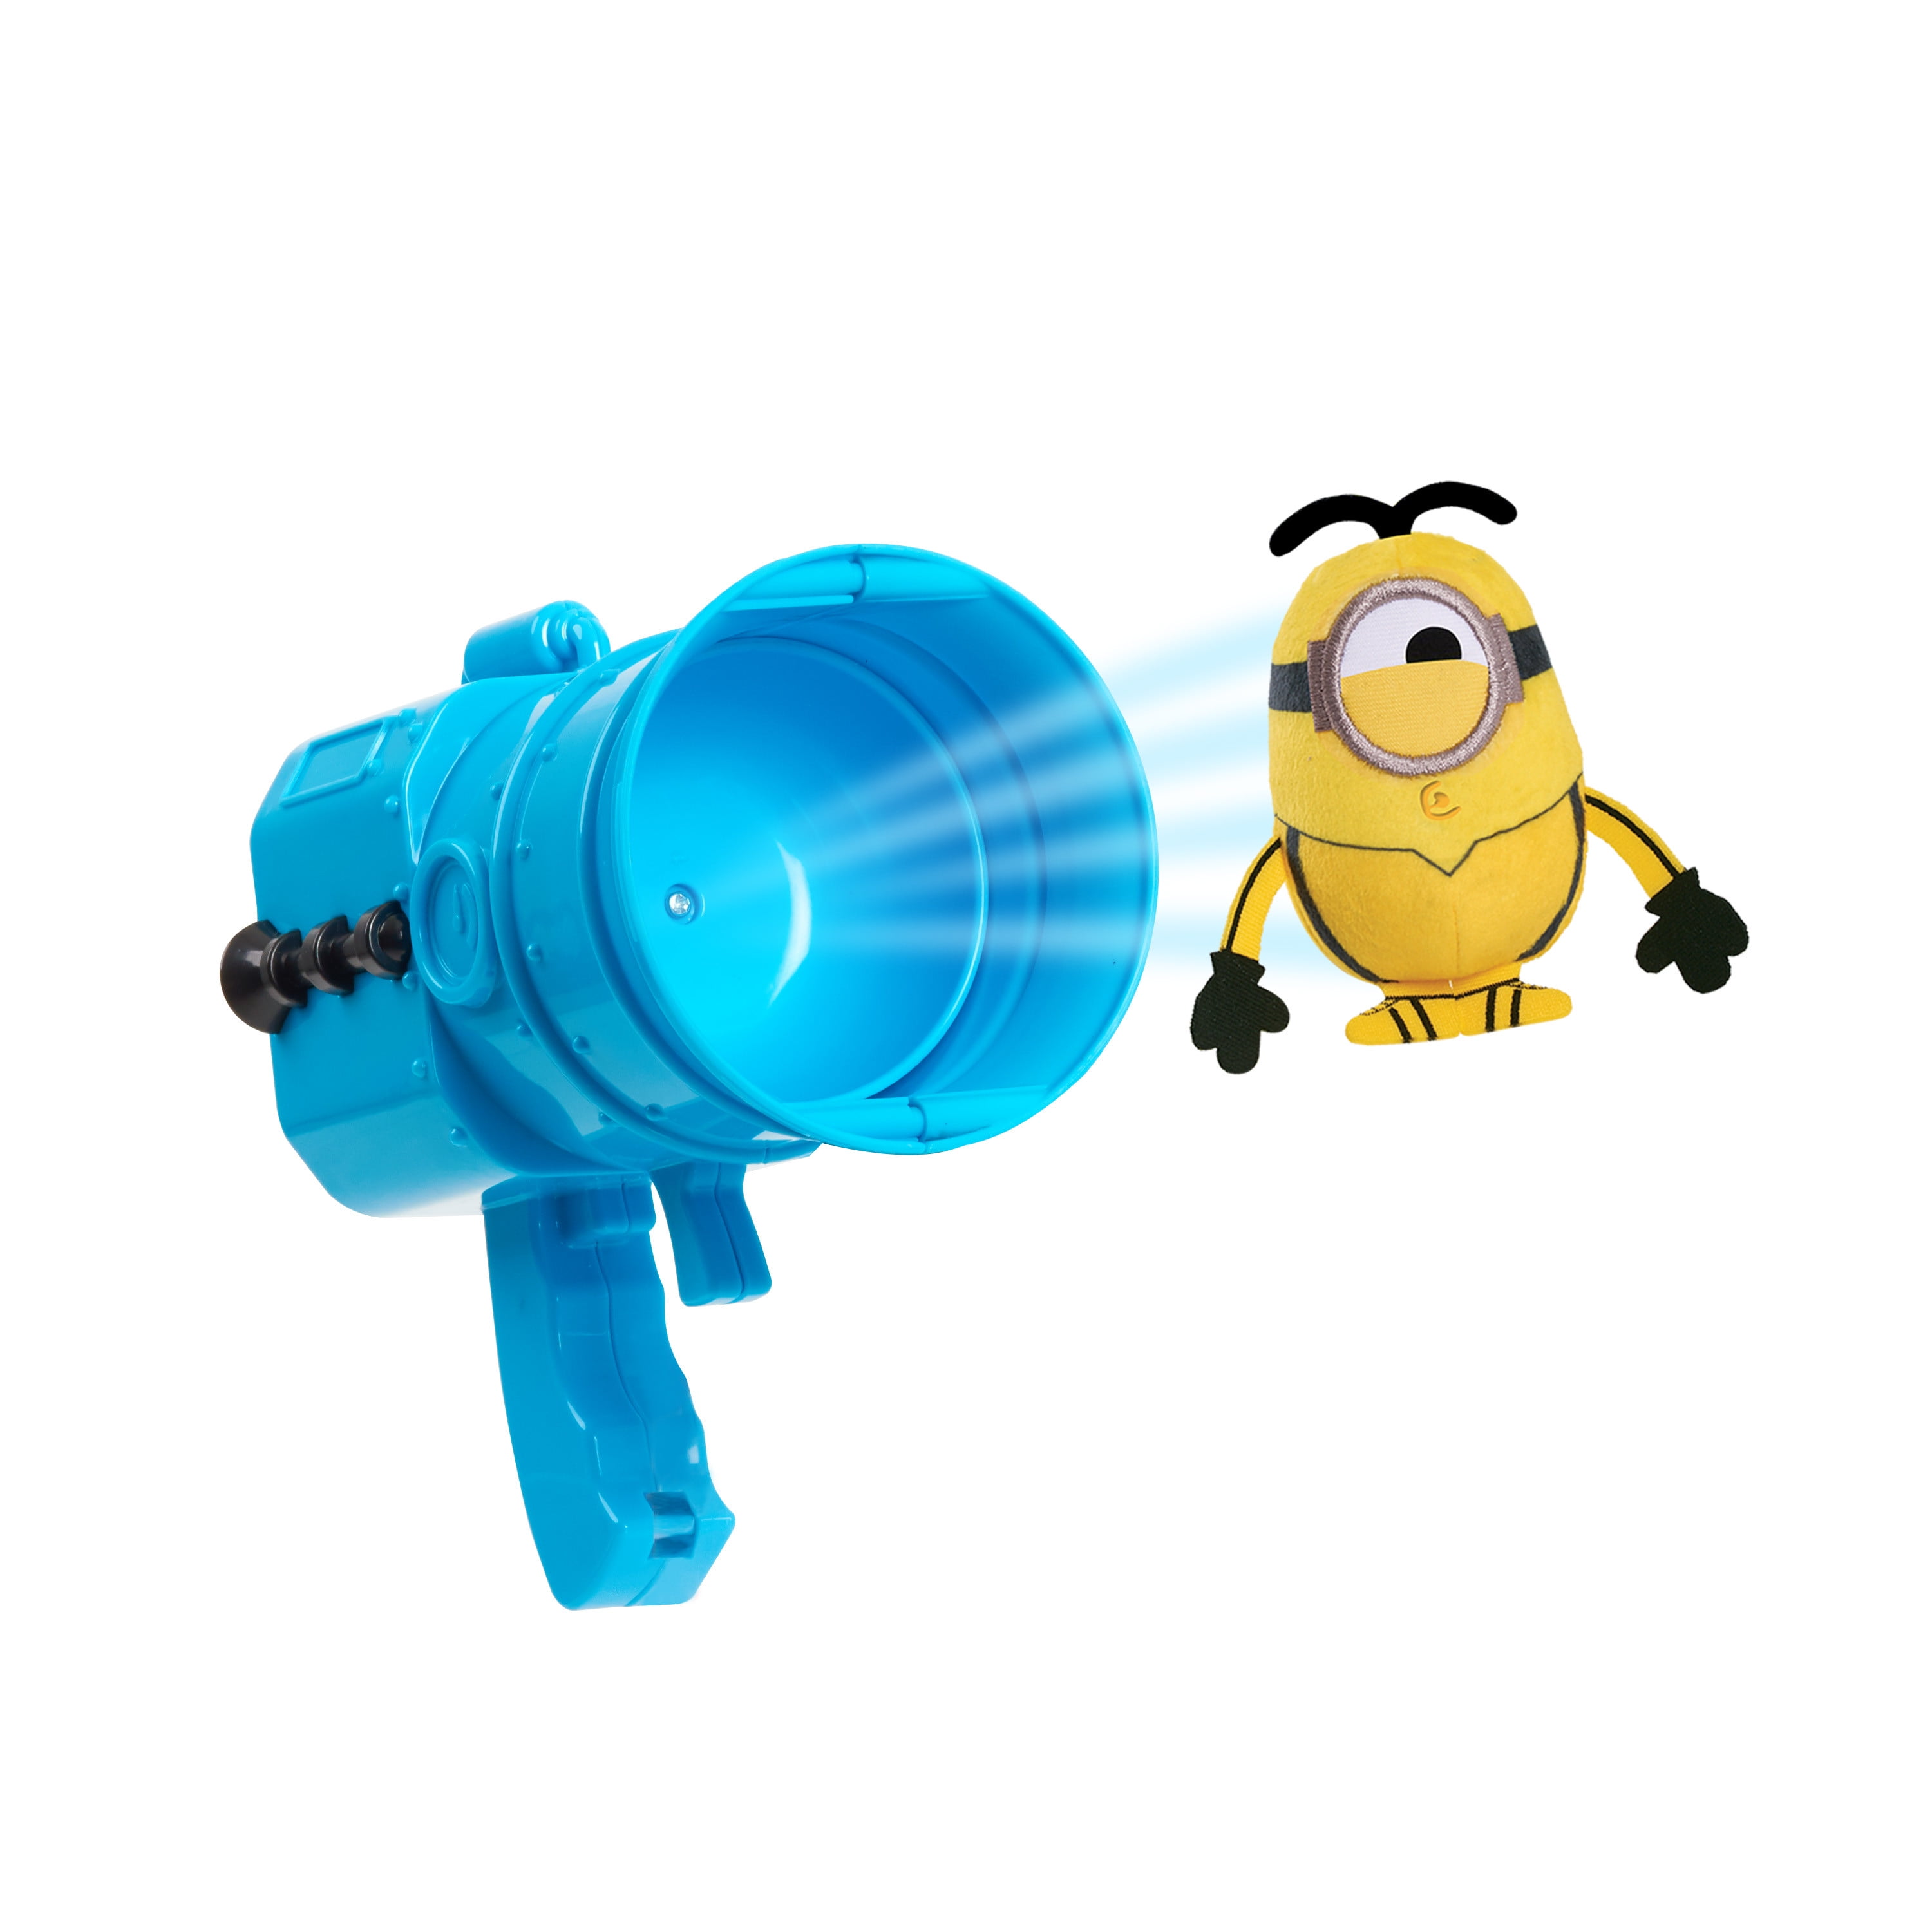 Mattel GMF93 Minions The Rise of Gru Fart N Fire Super-size Blaster for Kids for sale online